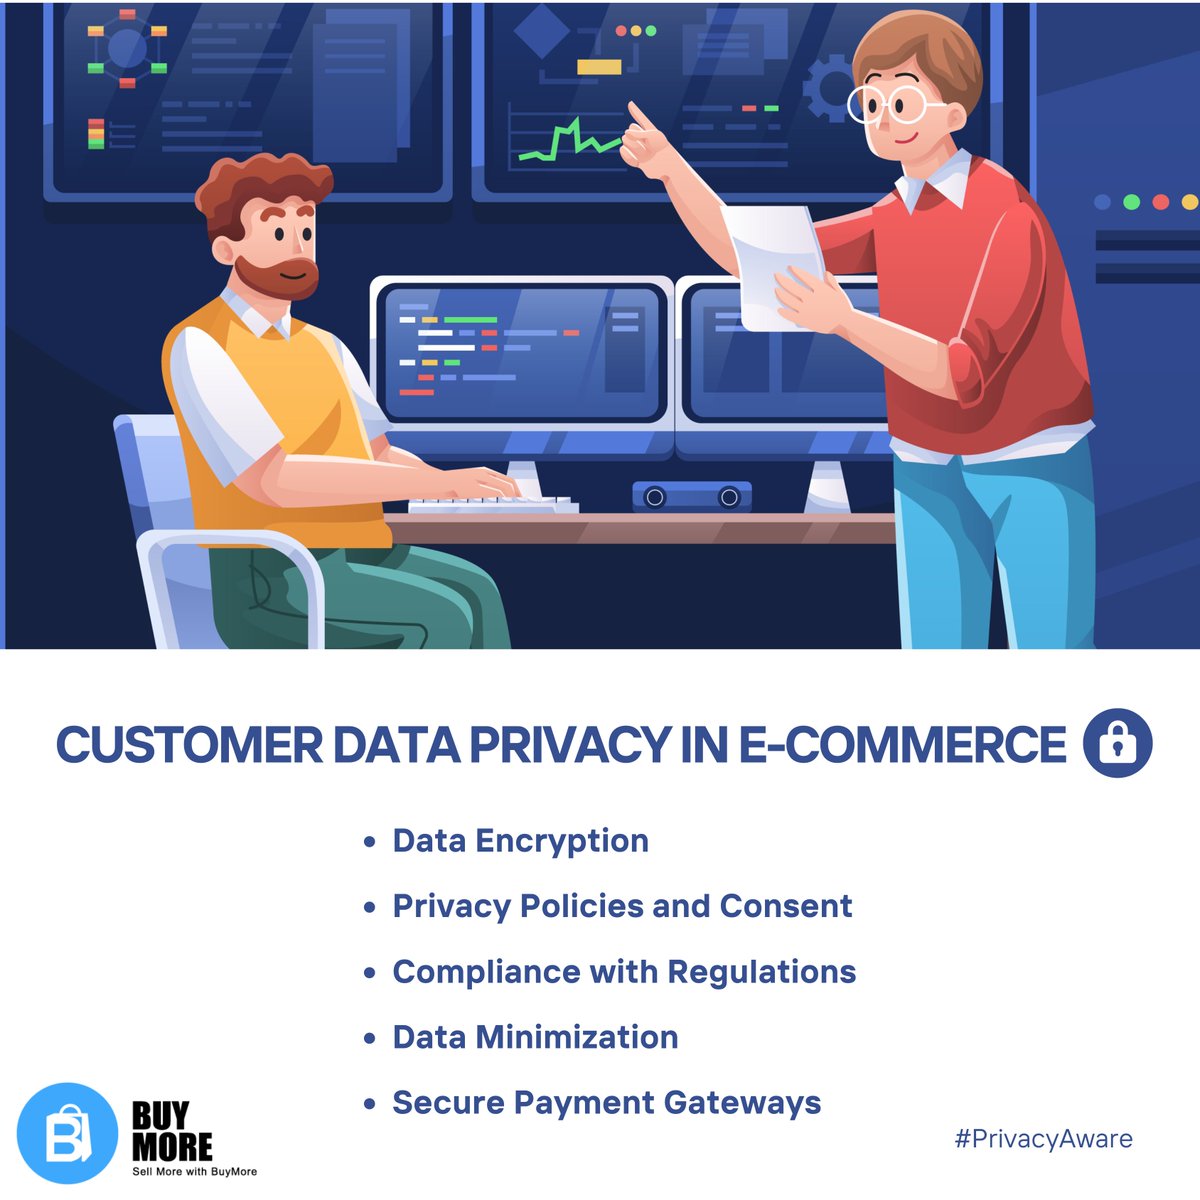 Have you been wondering how E-commerce Safeguards Your Information? 🔒

#DataEncryption #PrivacyPolicies #ConsentManagement #DataProtection #GDPR #CustomerPrivacy #DataSecurity #DataMinimization #SecurePayments #OnlineTransactions #PrivacyCompliance #EcommerceSecurity #BuyMore